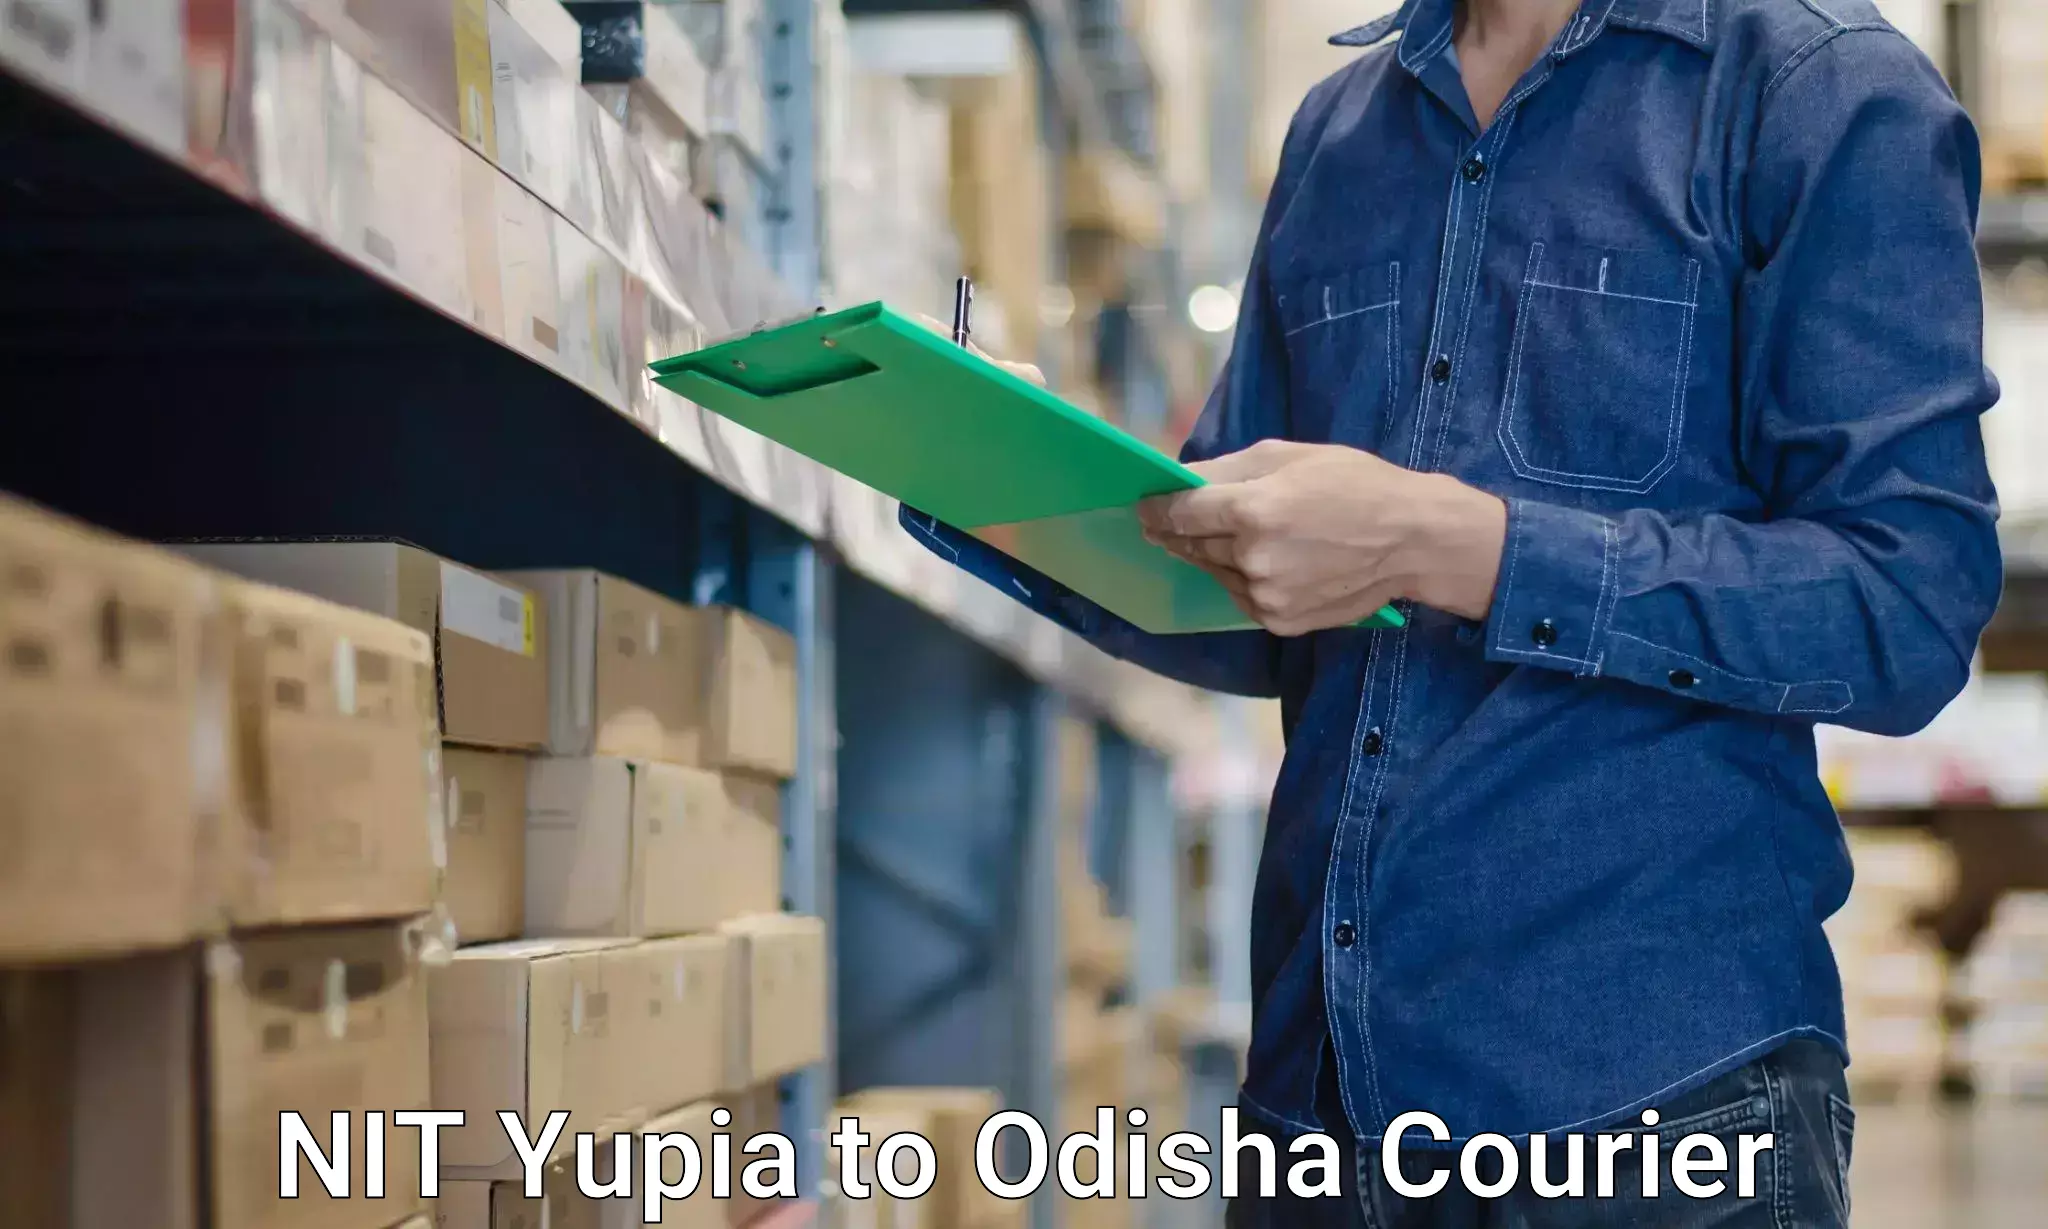 Home relocation experts NIT Yupia to Dandisahi